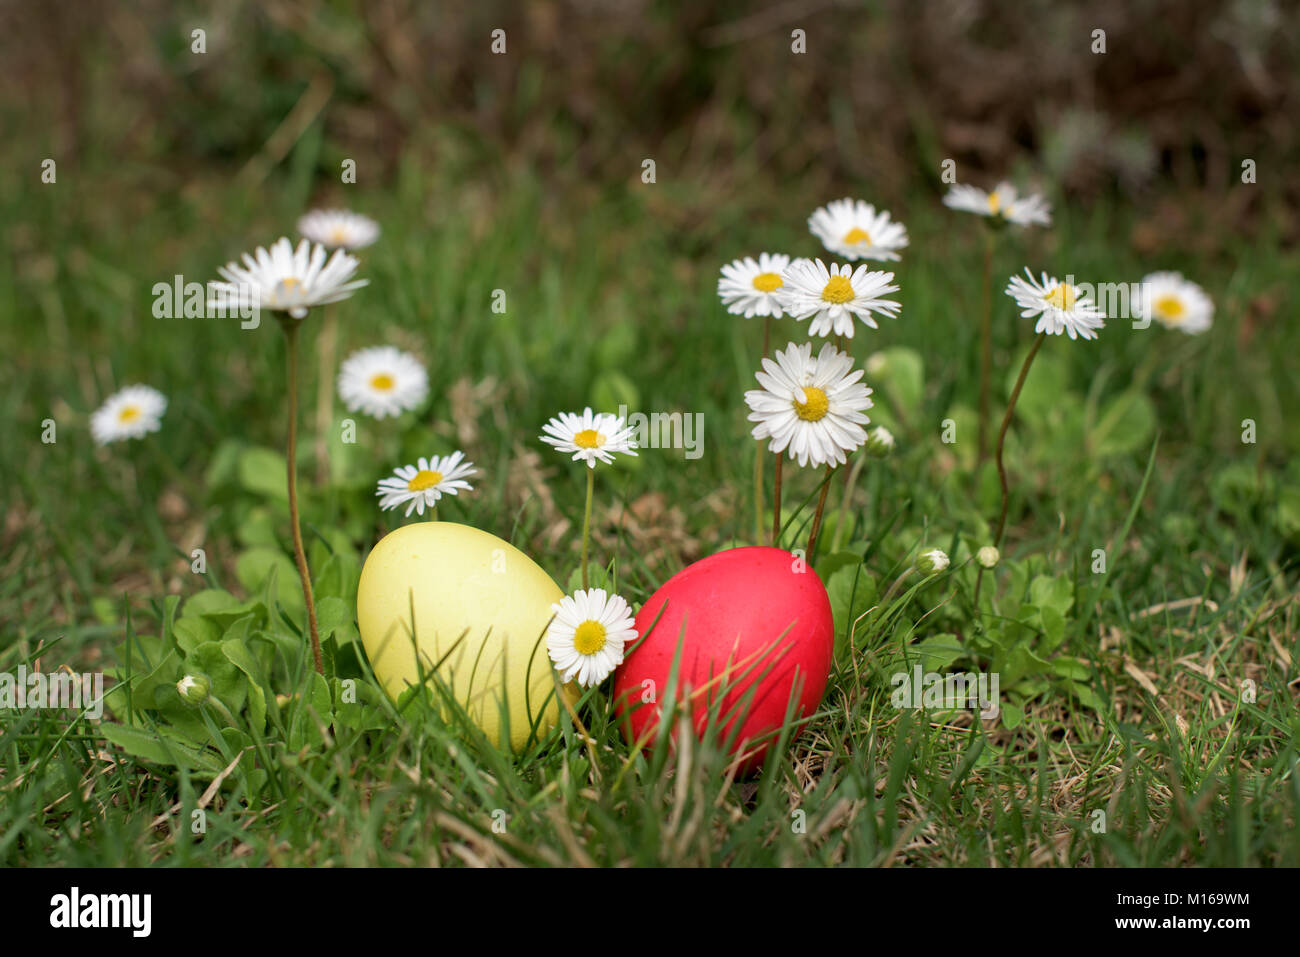 Two colored Easter eggs in a grass among daisies Stock Photo